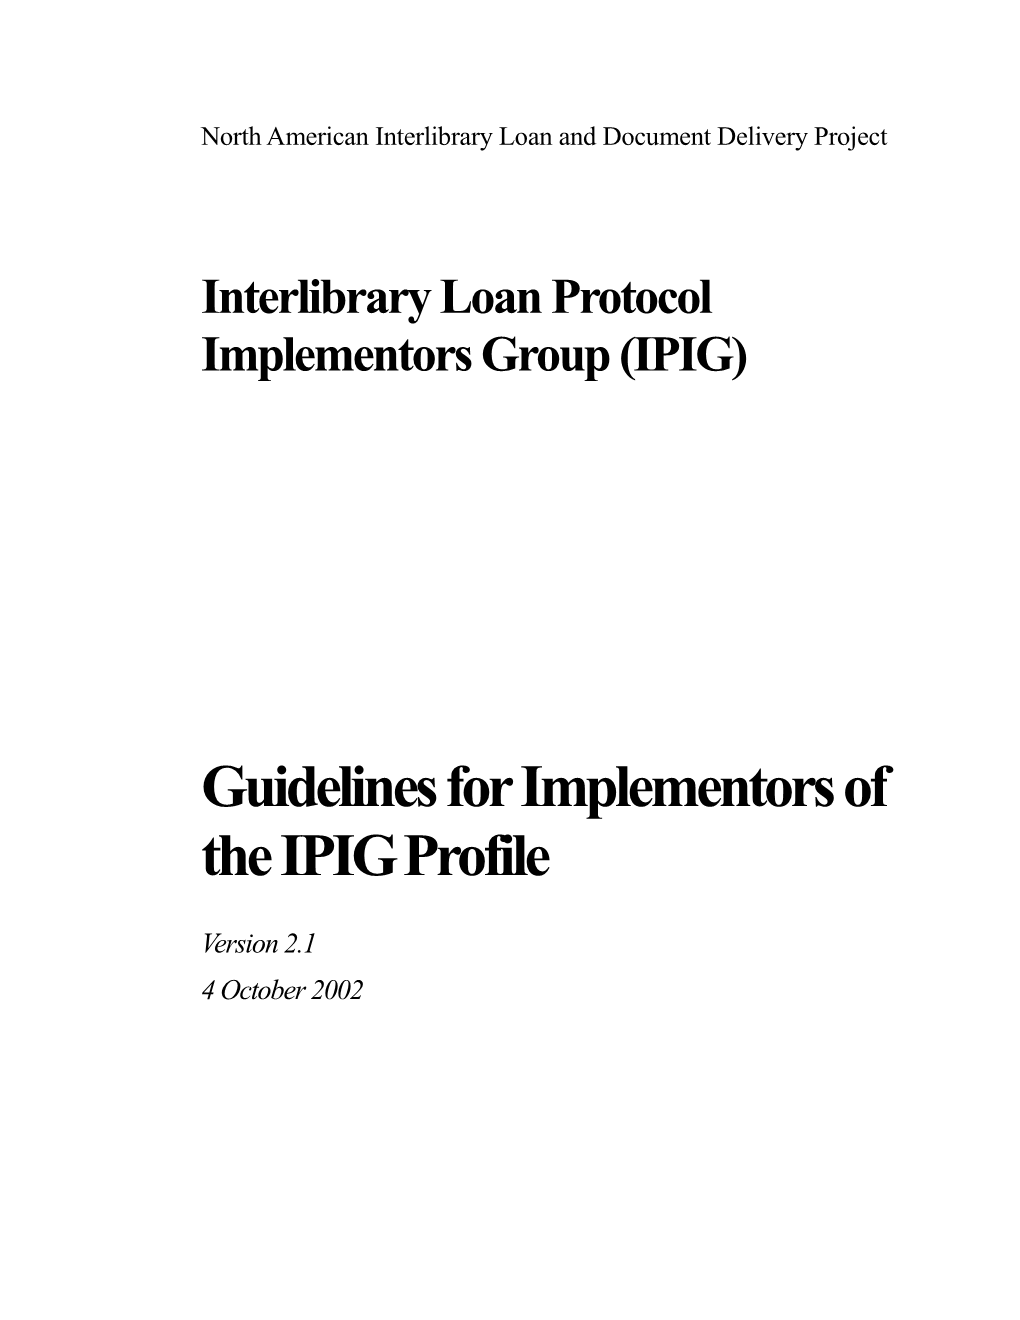 Guidelines for Implementors of the IPIG Profile